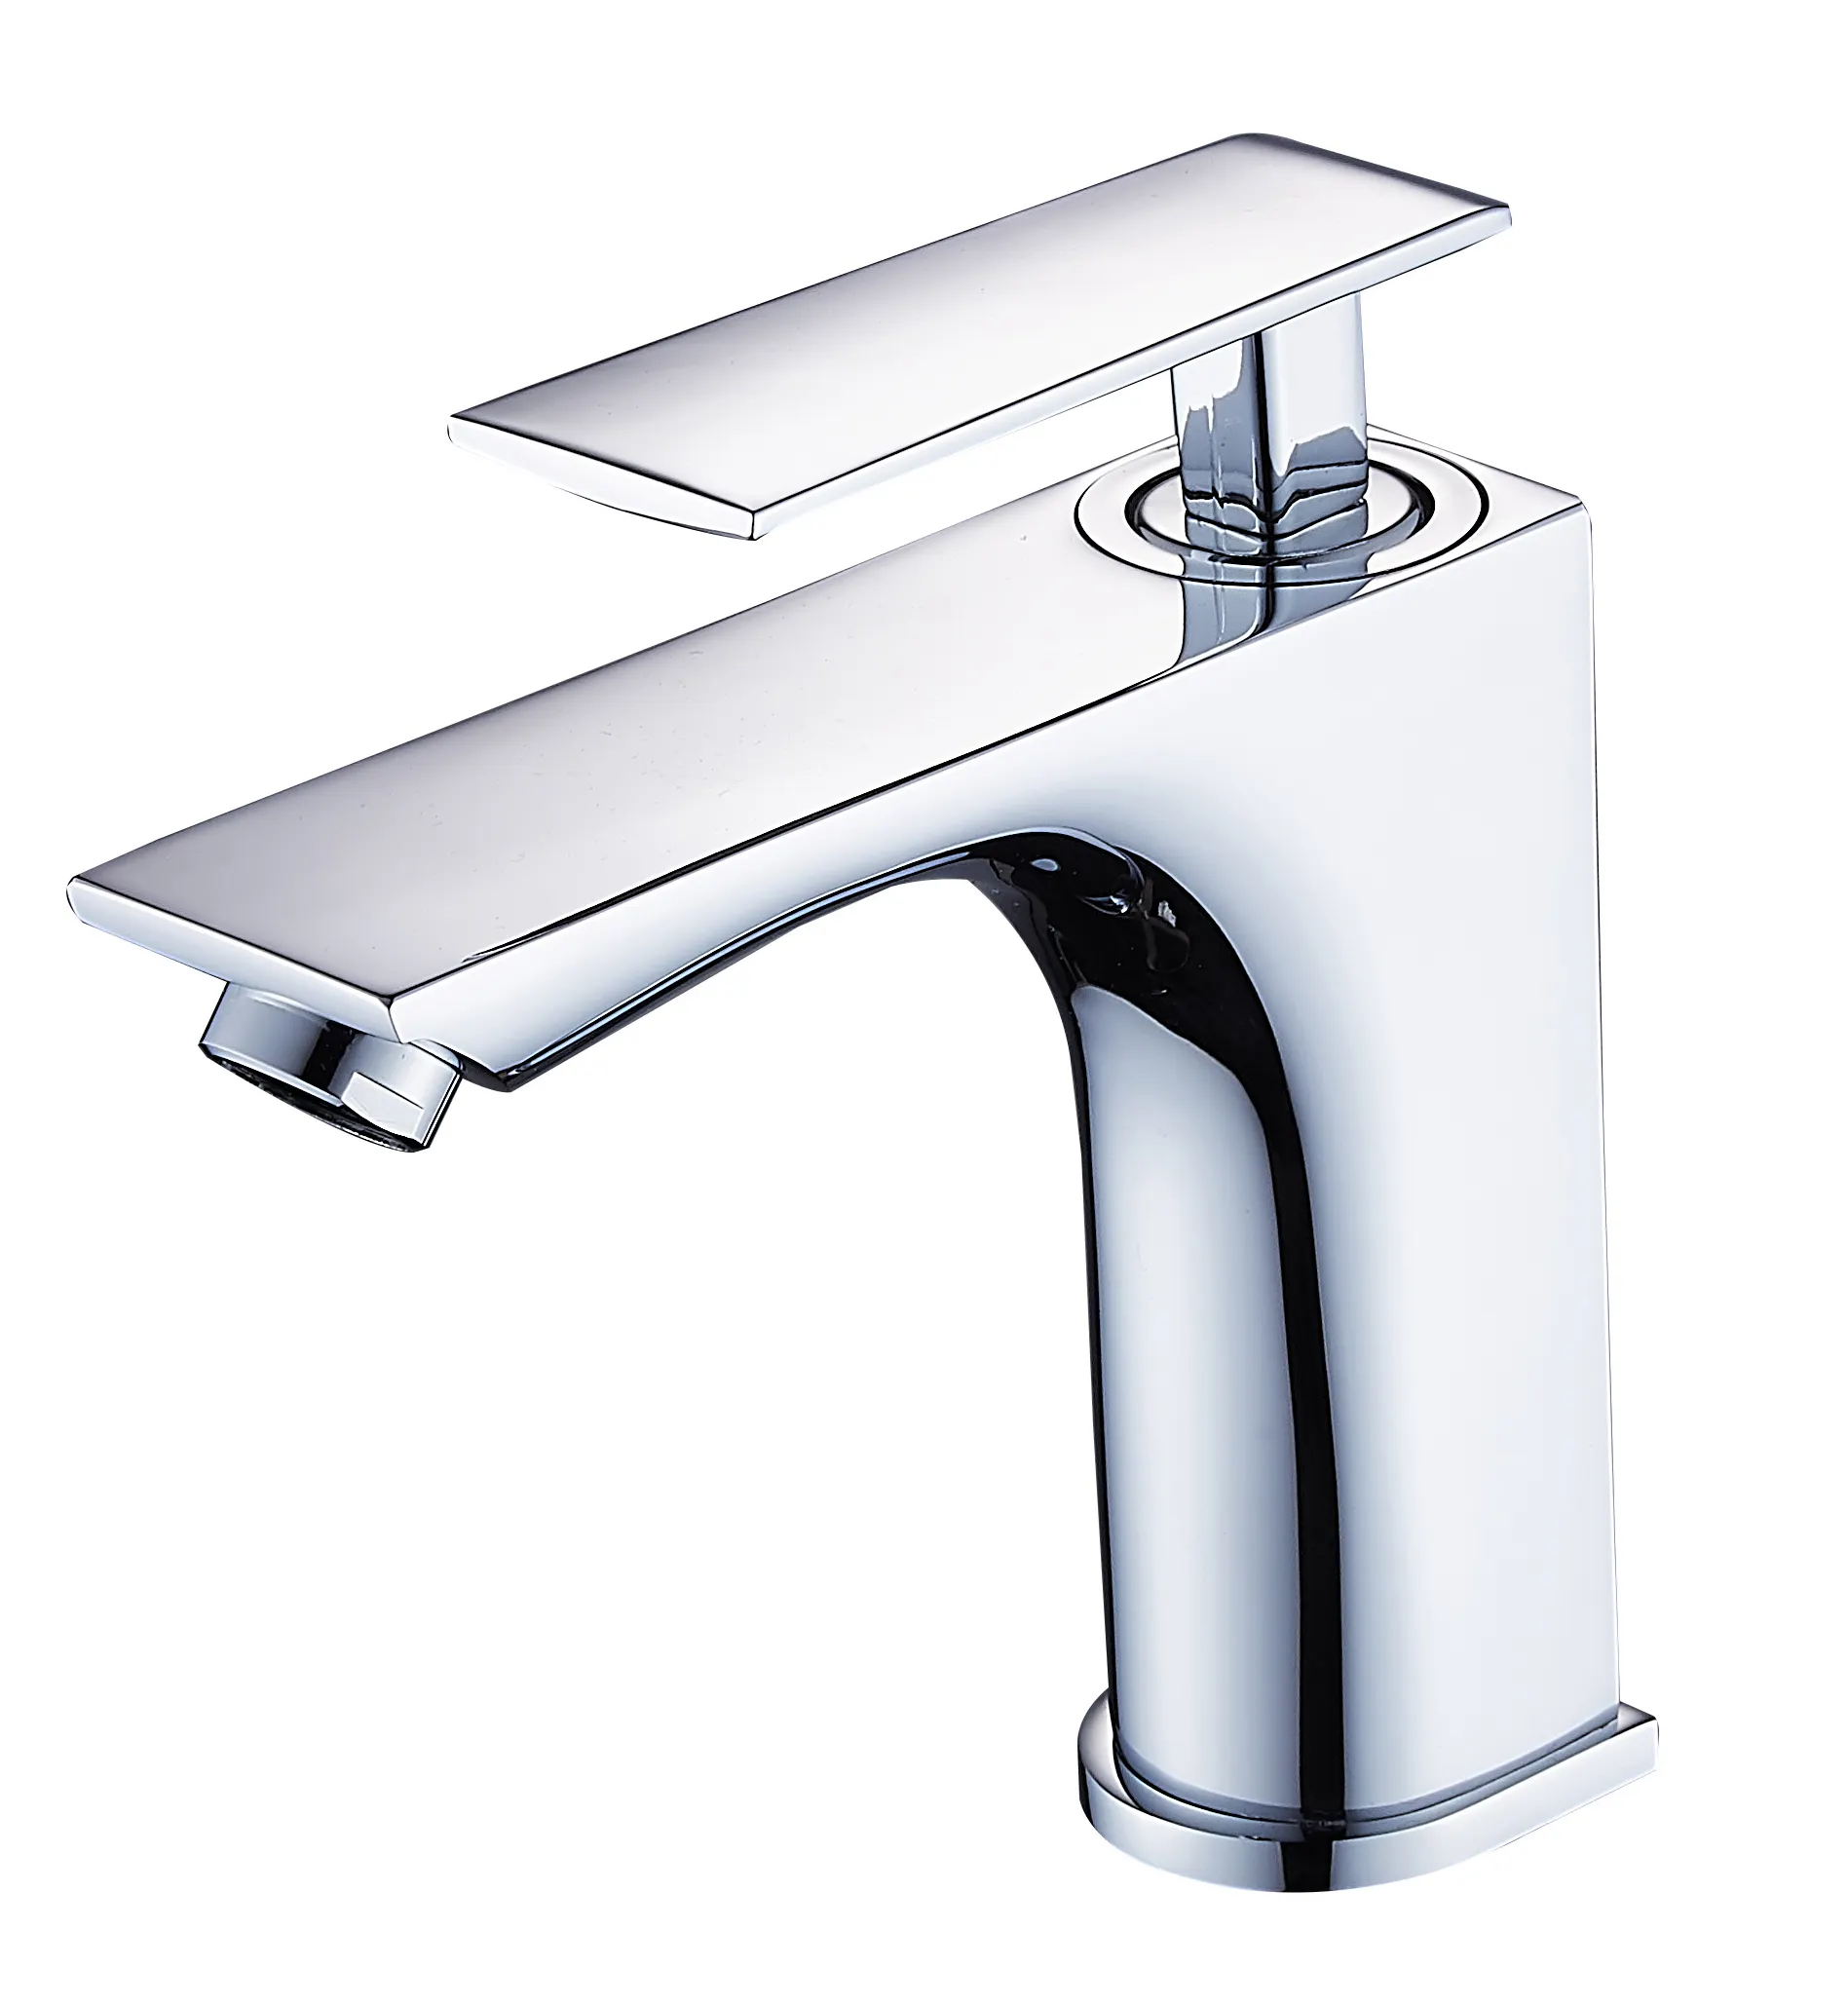 Deck wall mount series resist corrosion bathroom taps bath and shower faucet